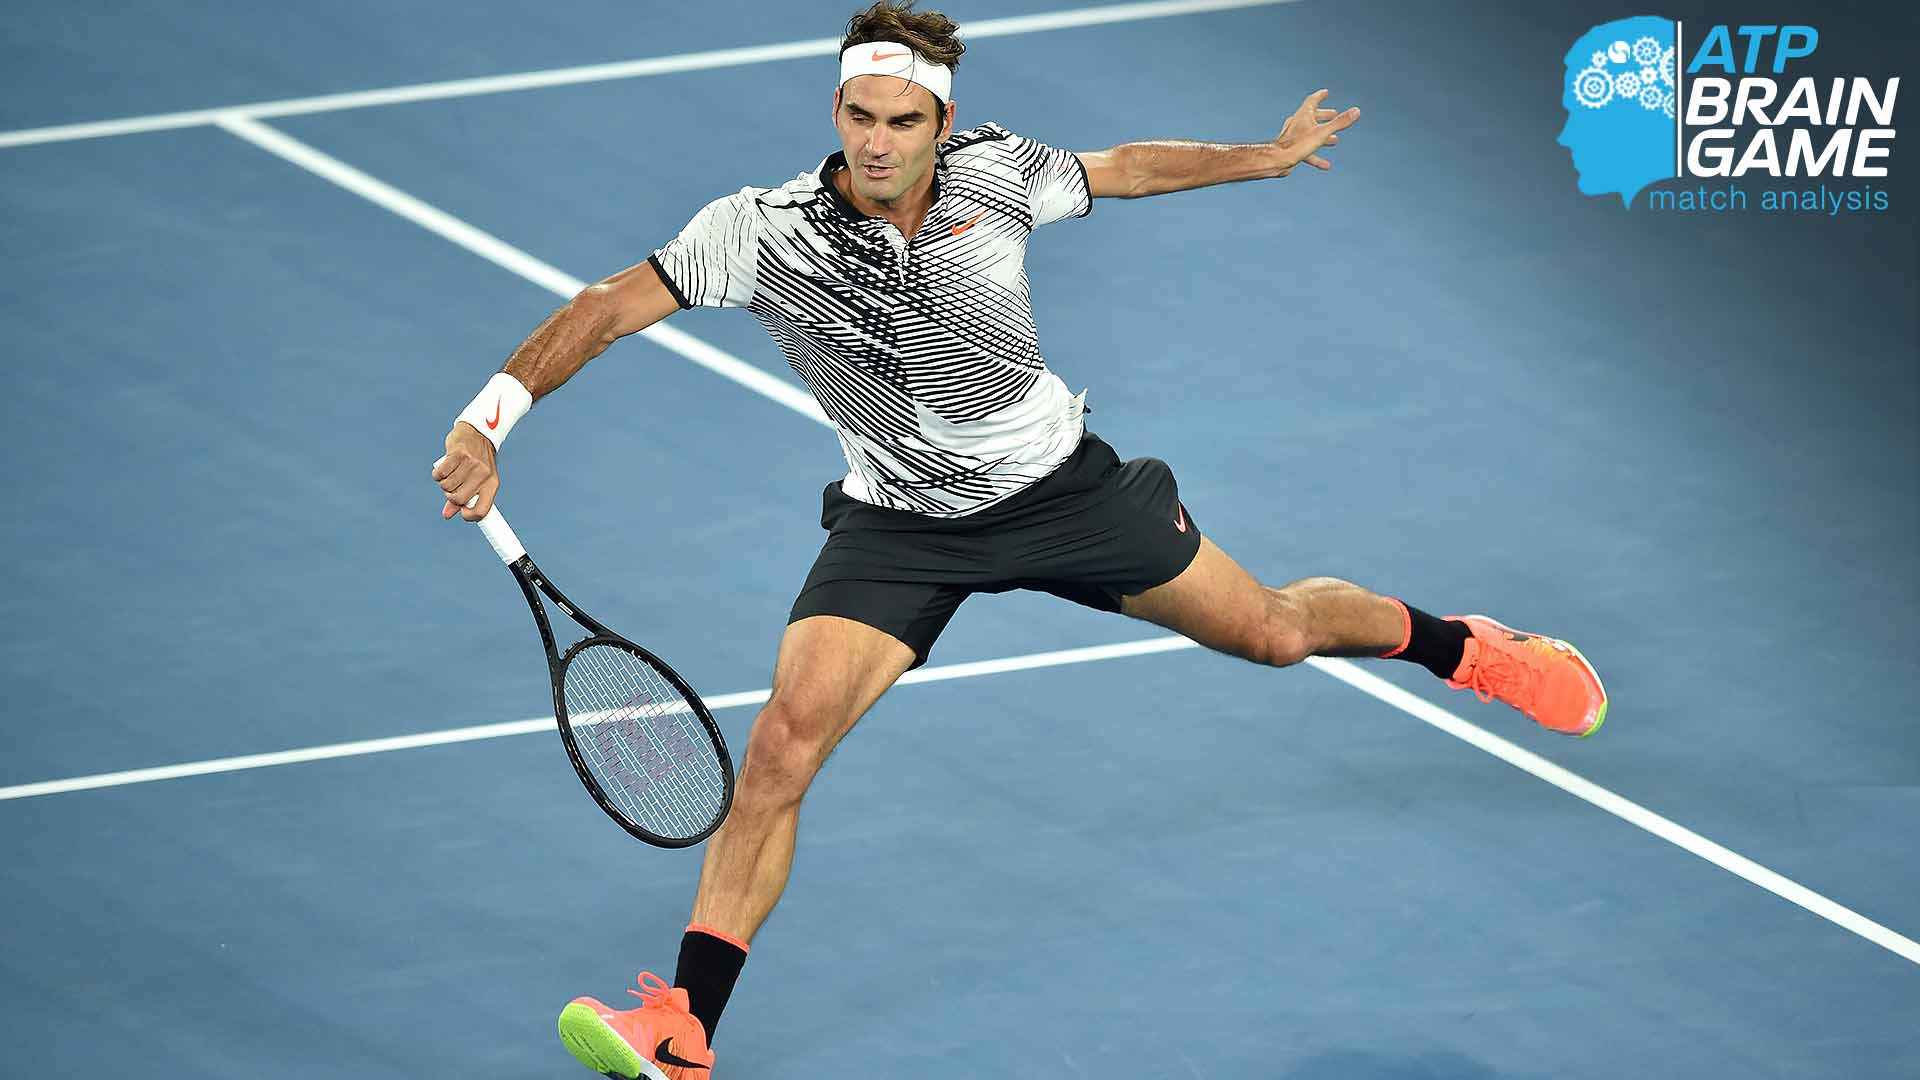 Brain Game: Roger Federer Charges His Way To Australian Open Title ...